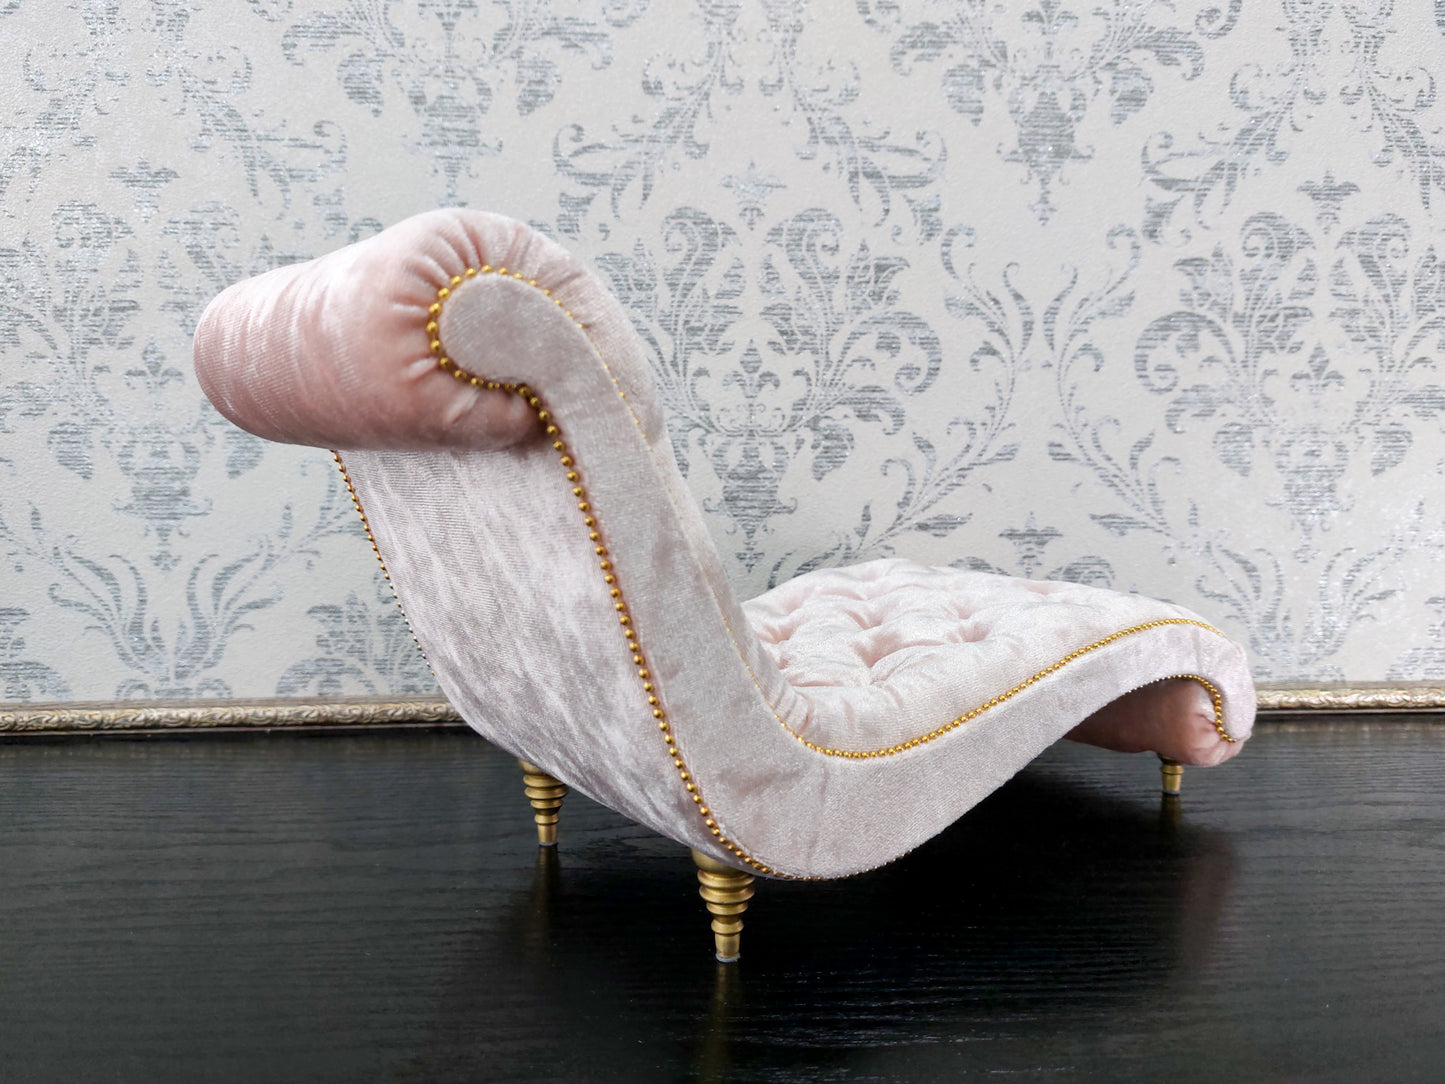 Chaise lounge Wave pink